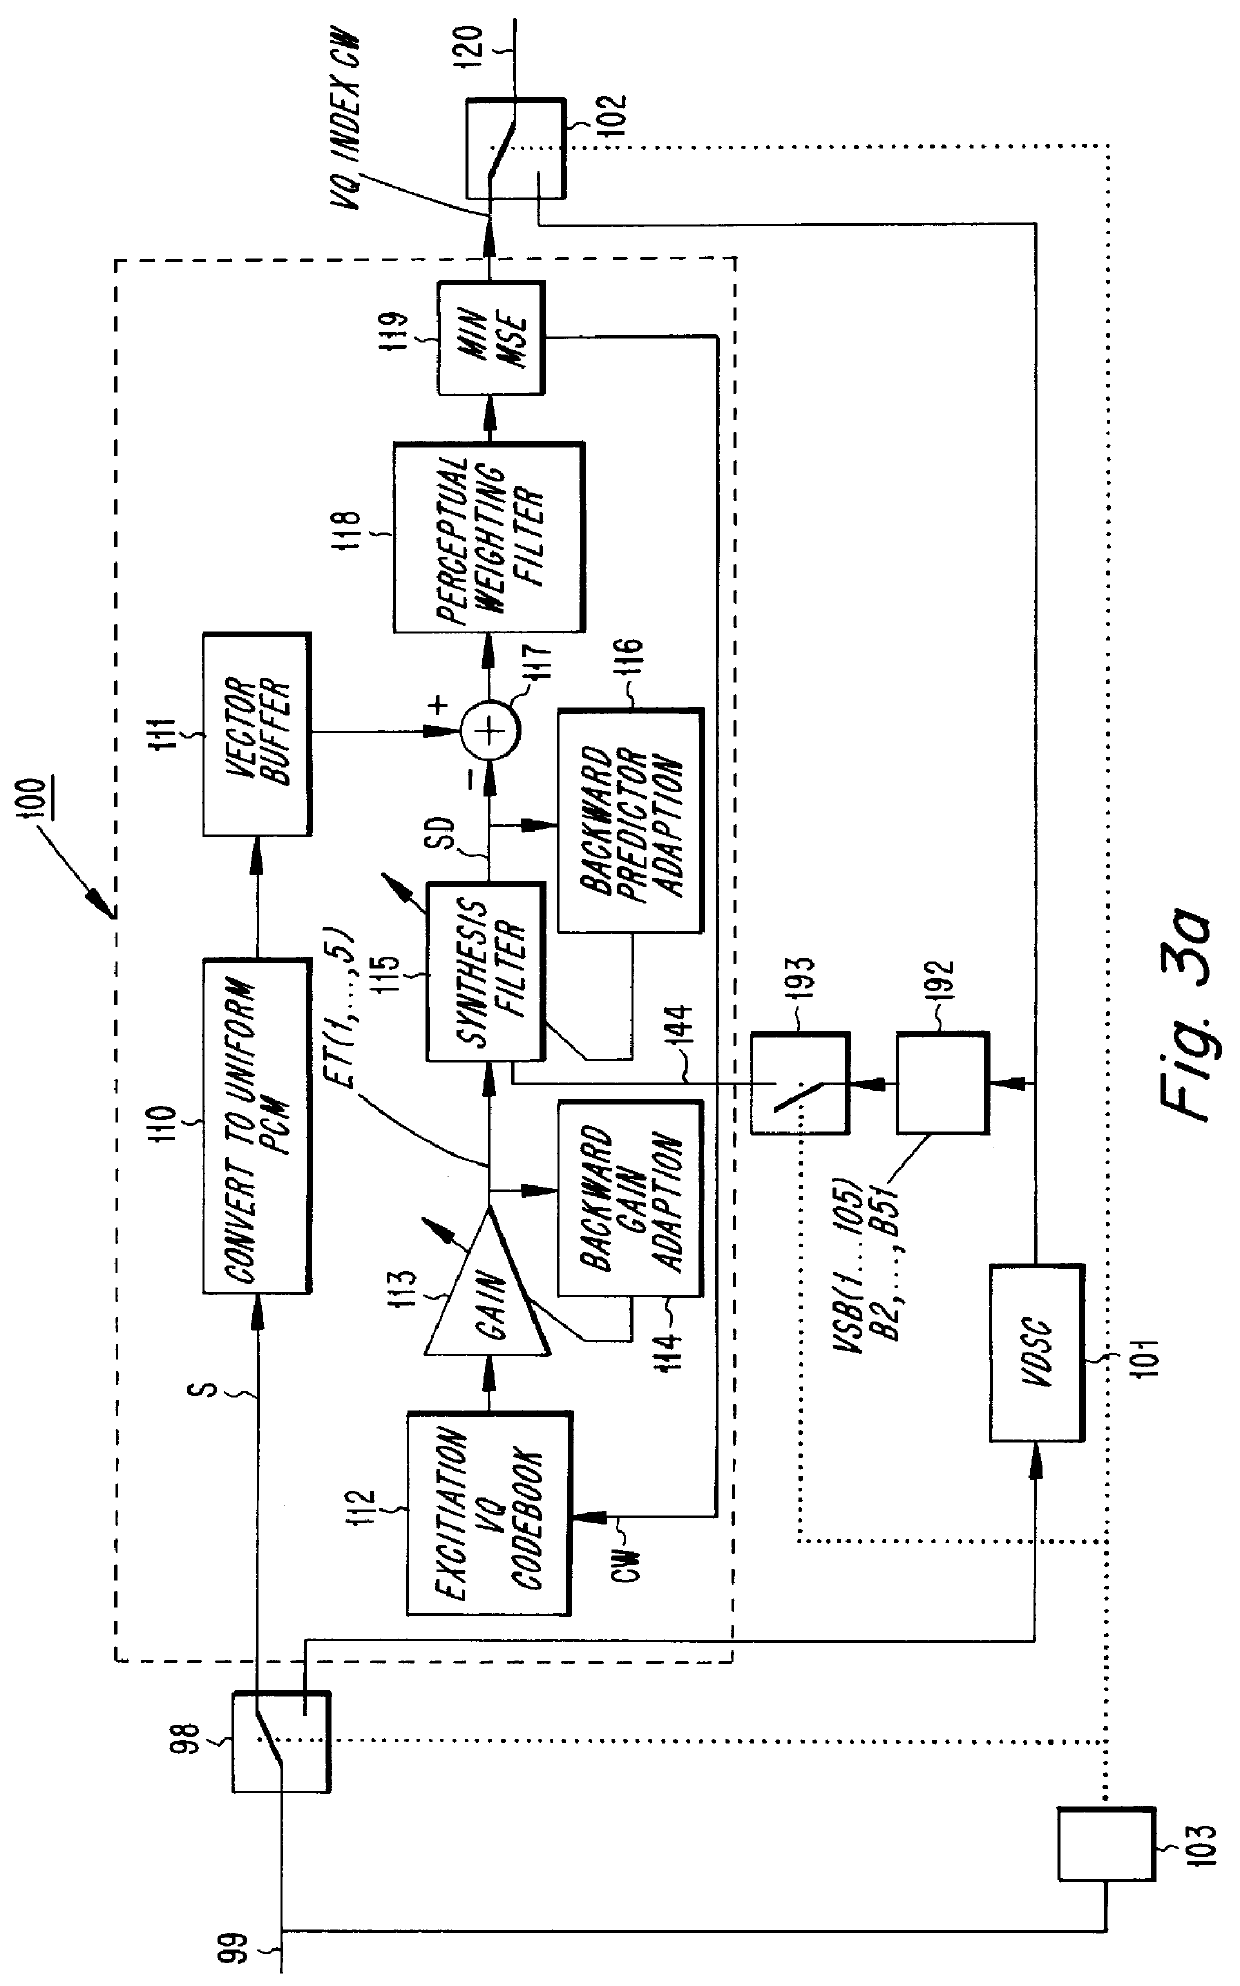 Method and apparatus in coding digital information